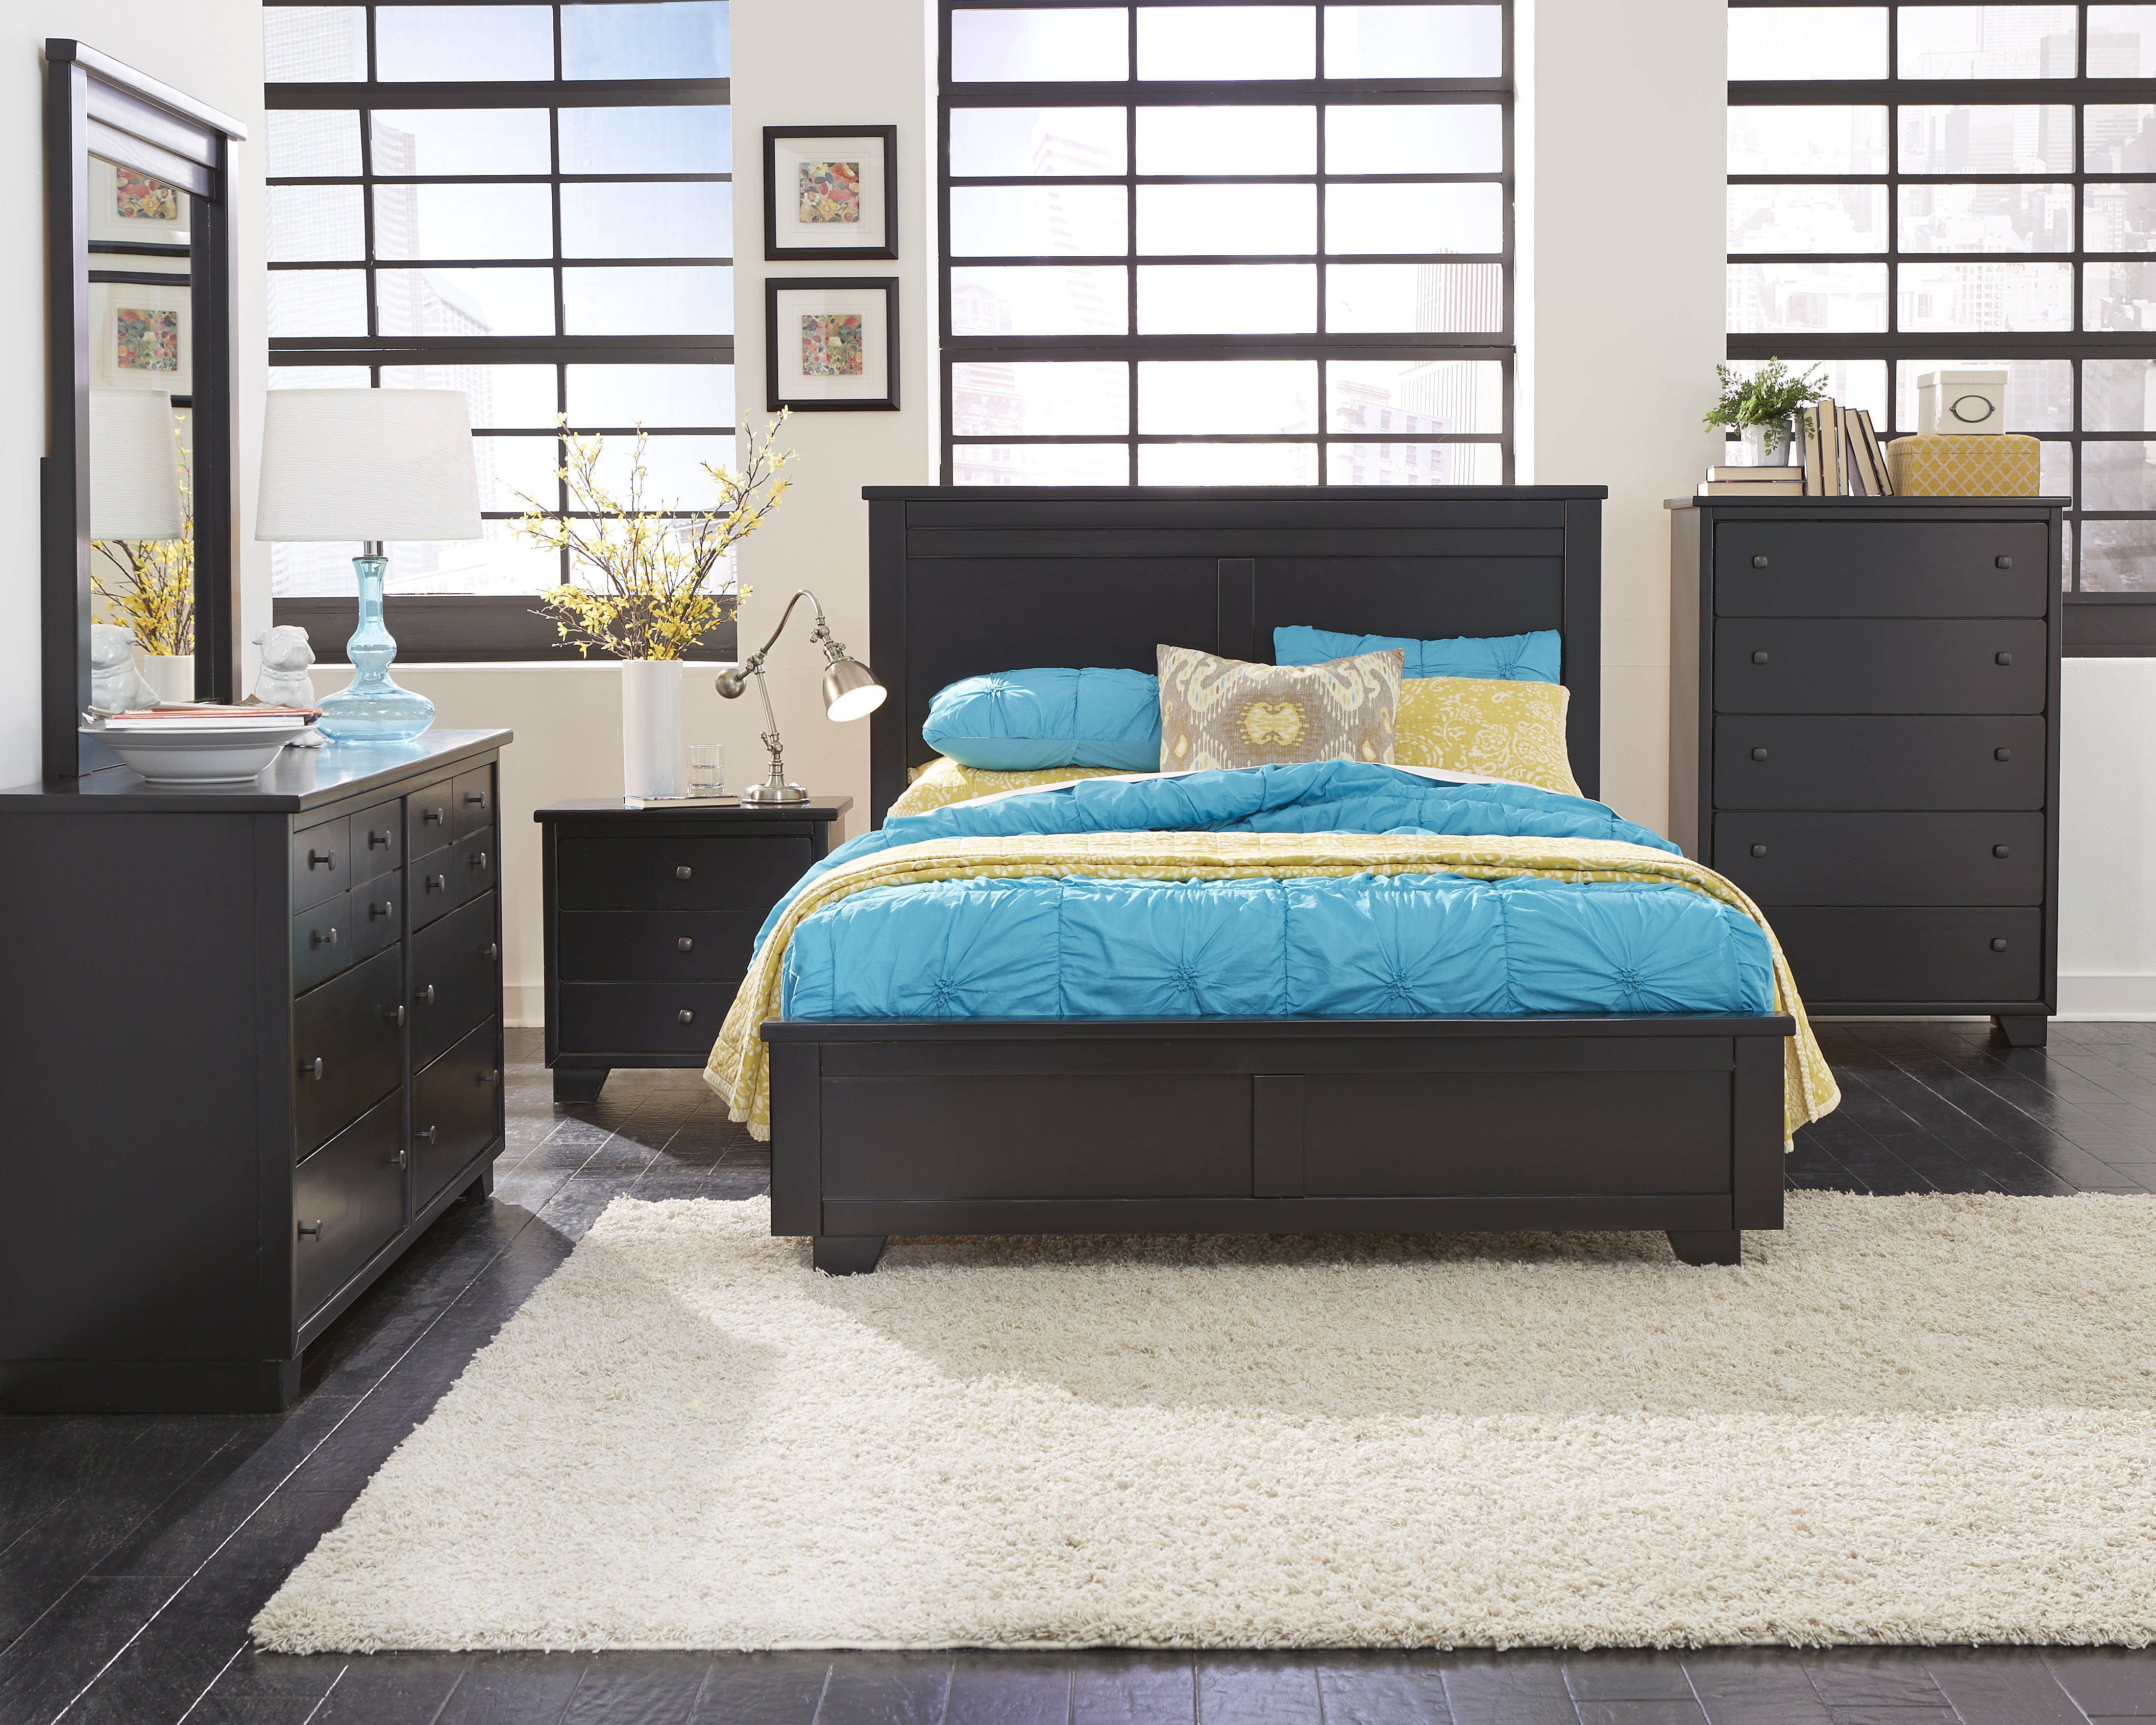 Progressive Furniture Diego Black 2pc Bedroom Set With Queen Bed with dimensions 4224 X 3379